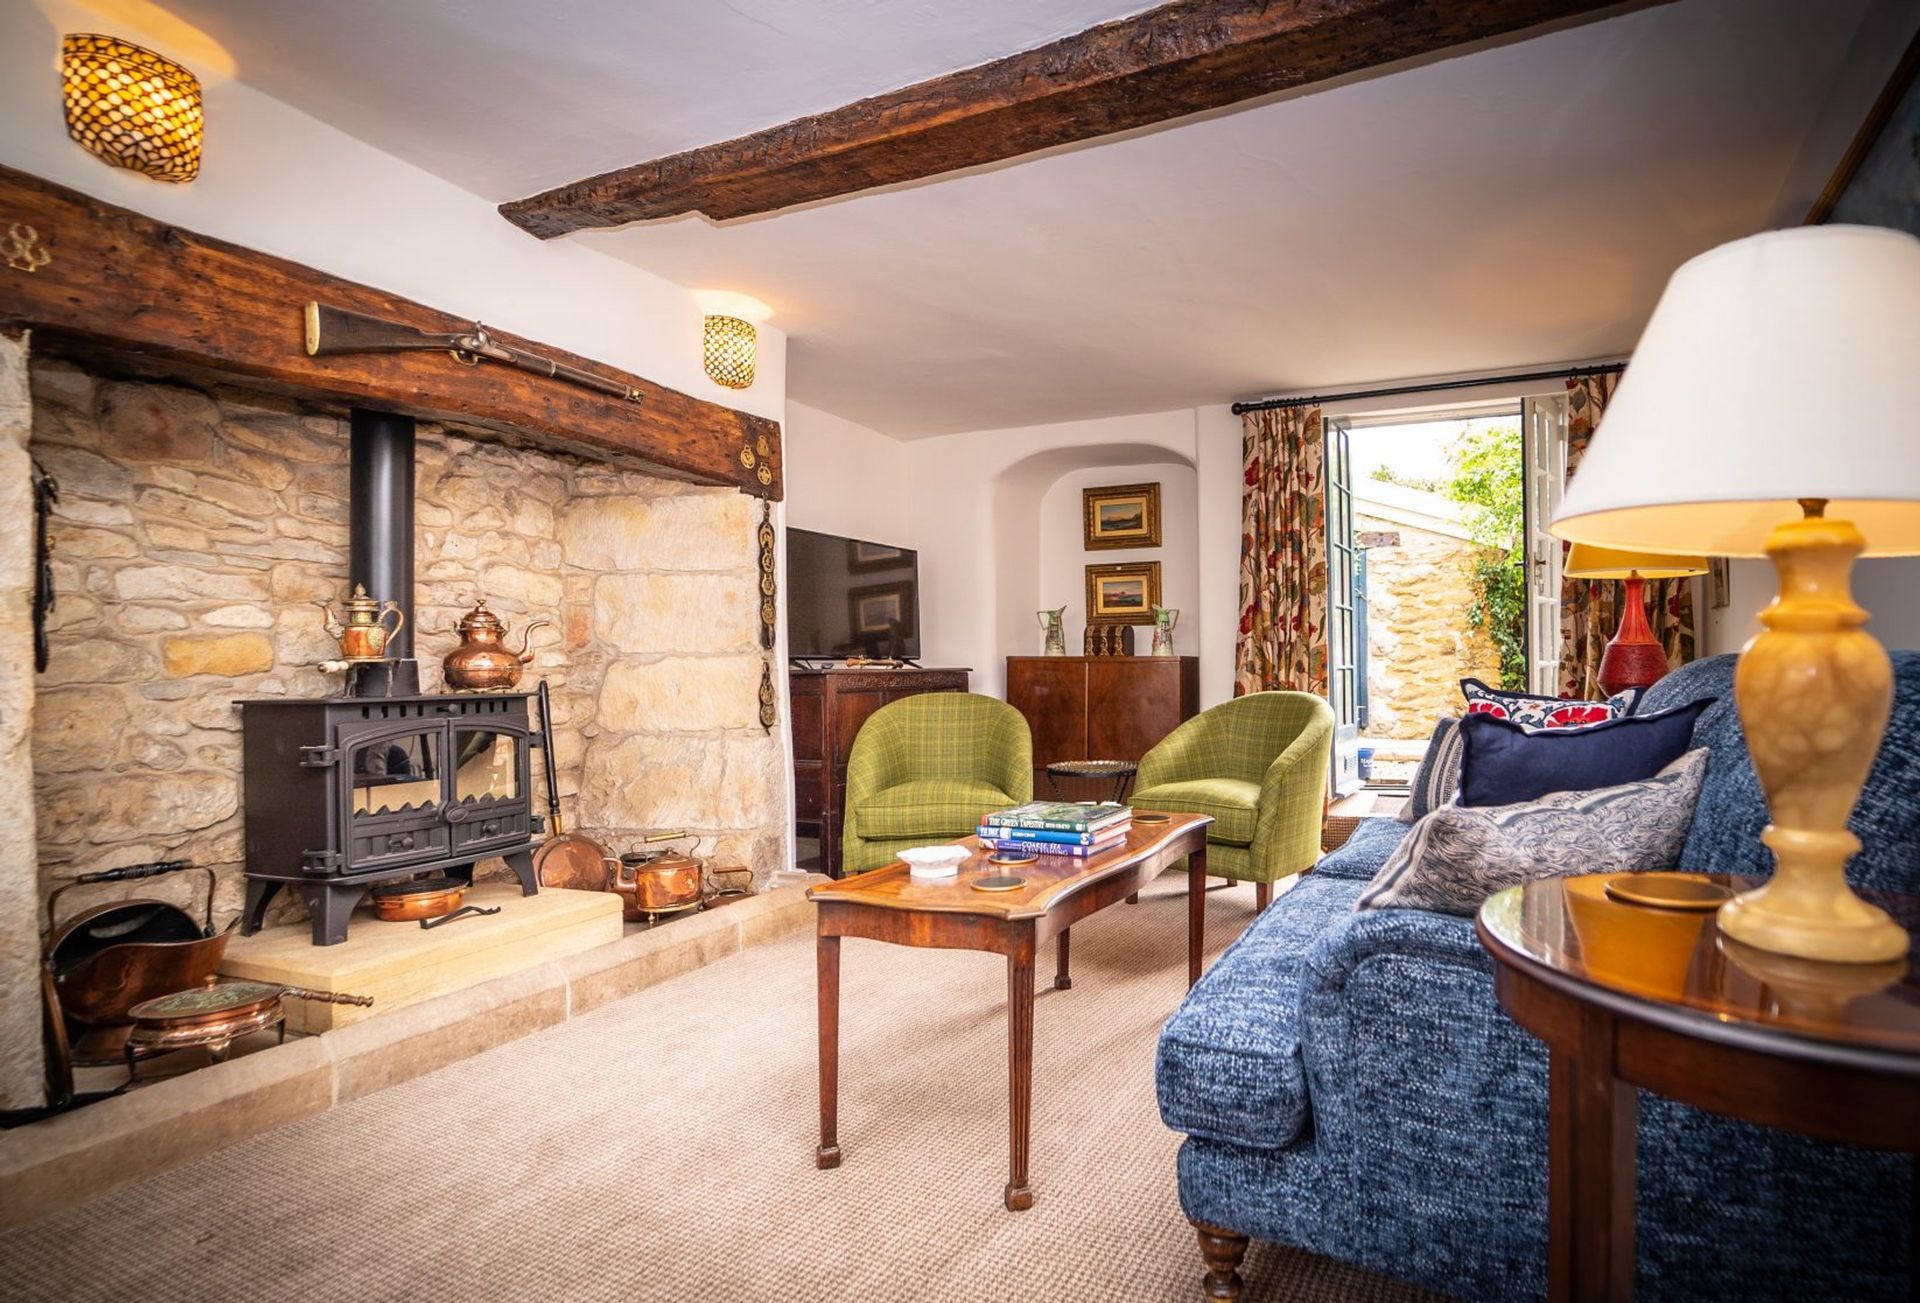 More information about Eastbury Cottage - ideal for a family holiday